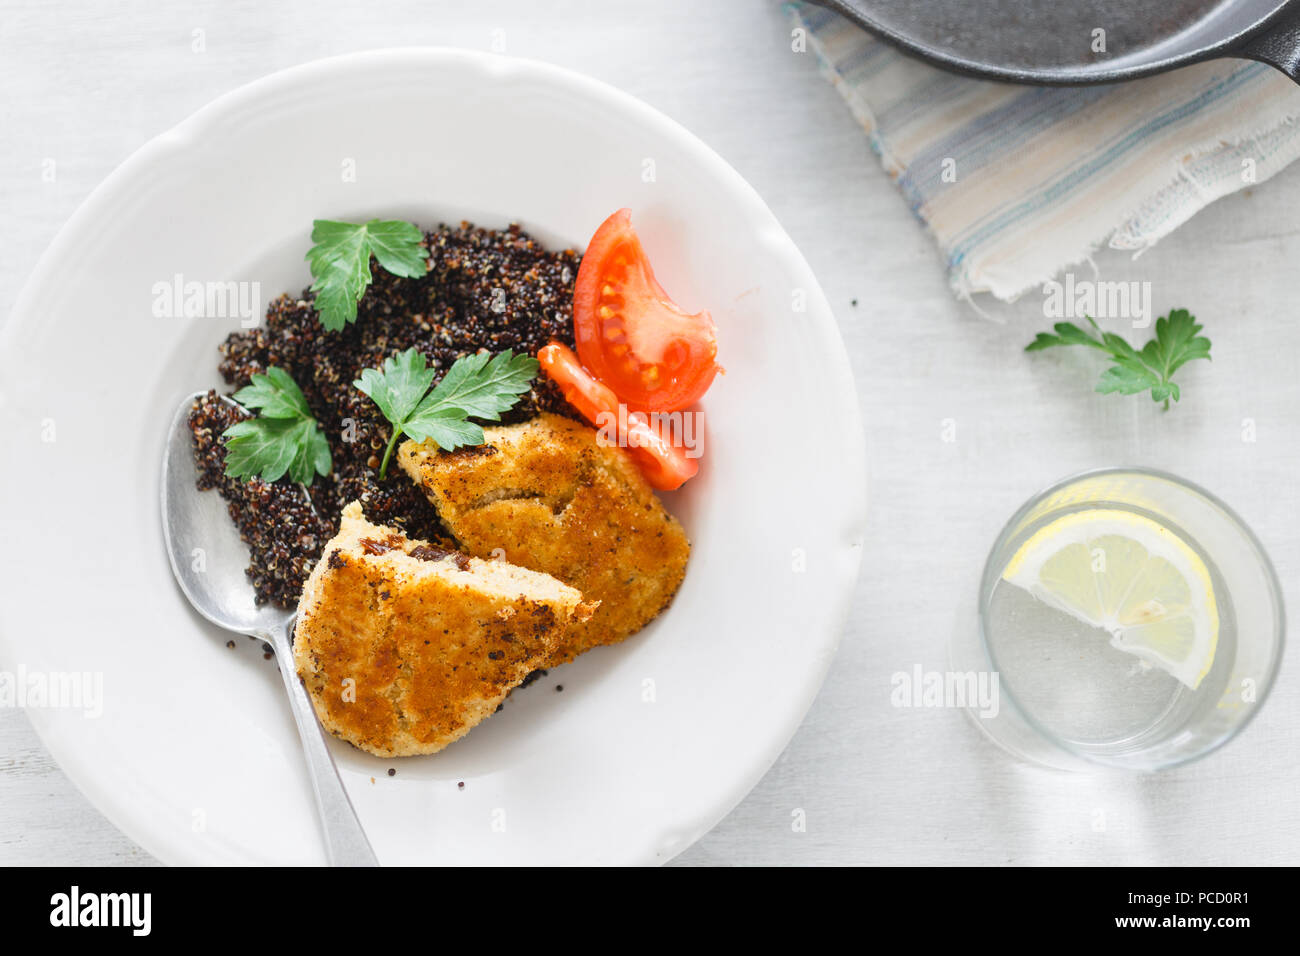 Top View Healthy Vegetarian Food. Plate with black quinoa and oatmeal cutlets with prunes on white wooden table with lemon water. Copy space Stock Photo